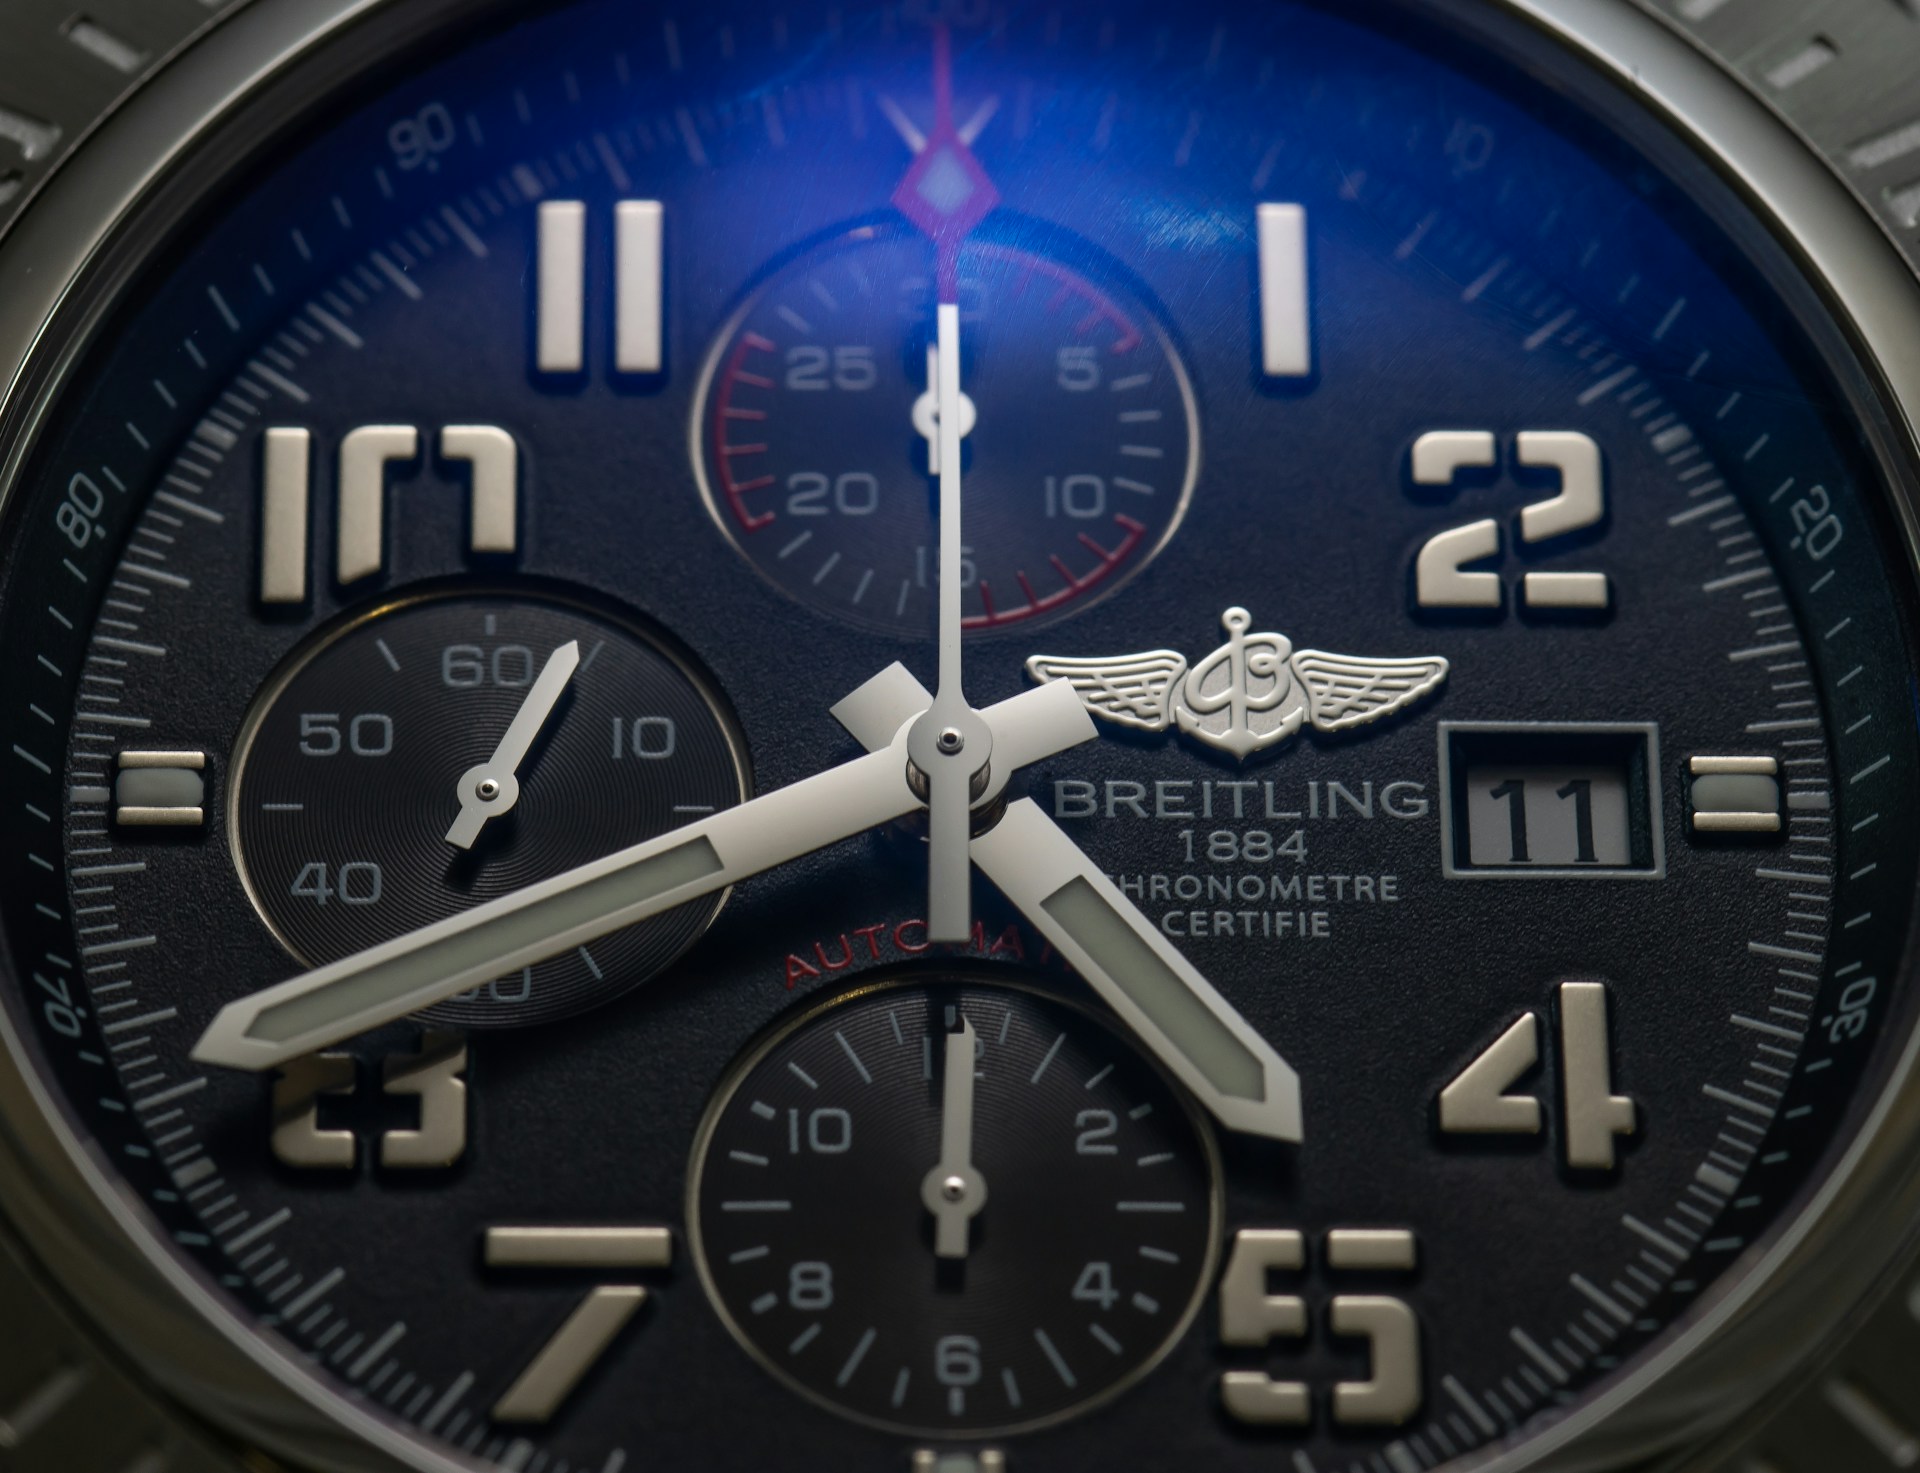 close-up of a Breitling chronometer watch face